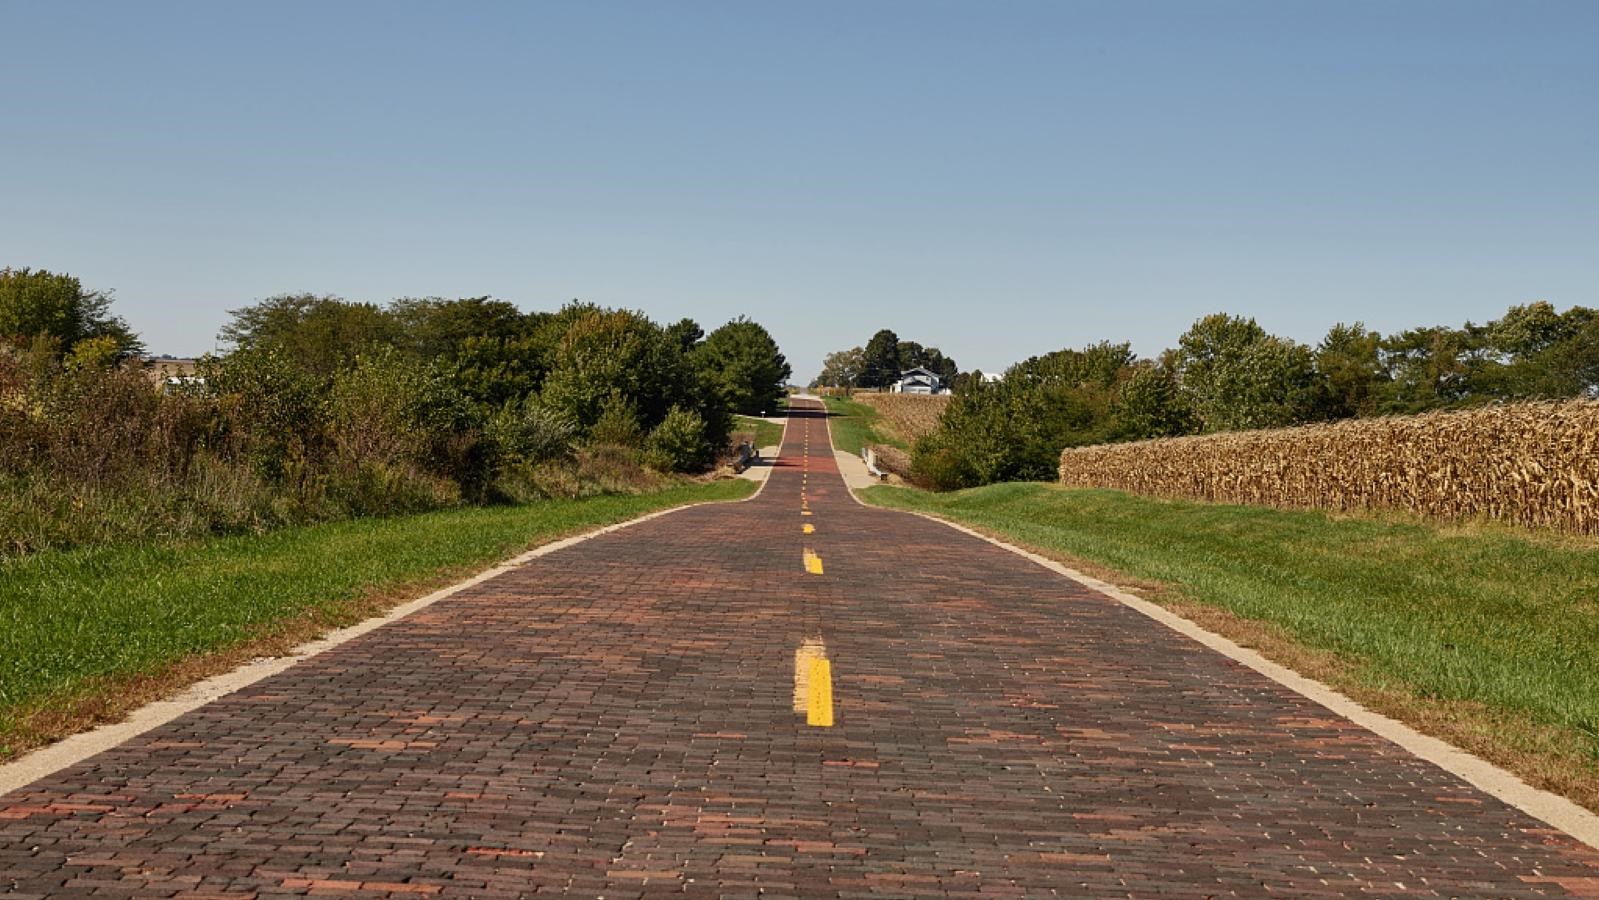 A red brick road winds through a green field with evergreen trees in the distance.